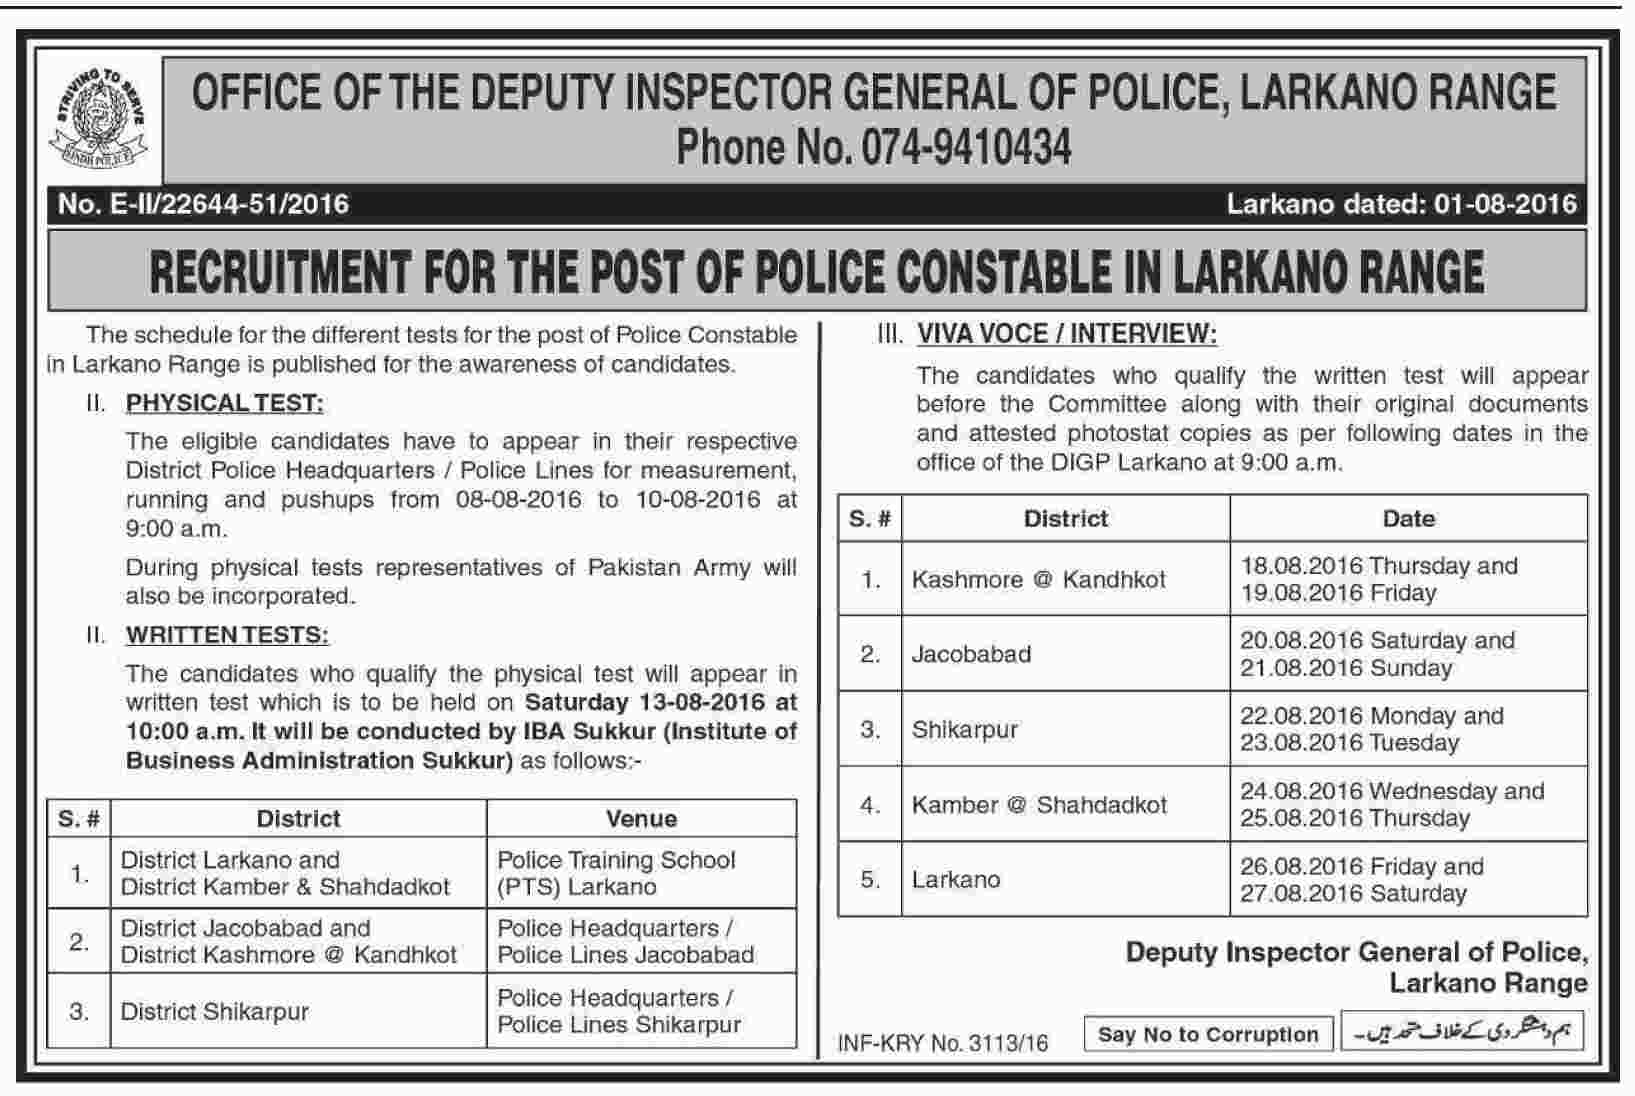 Schedule - Recruitment for the Post of Police Constable in Larkano Range